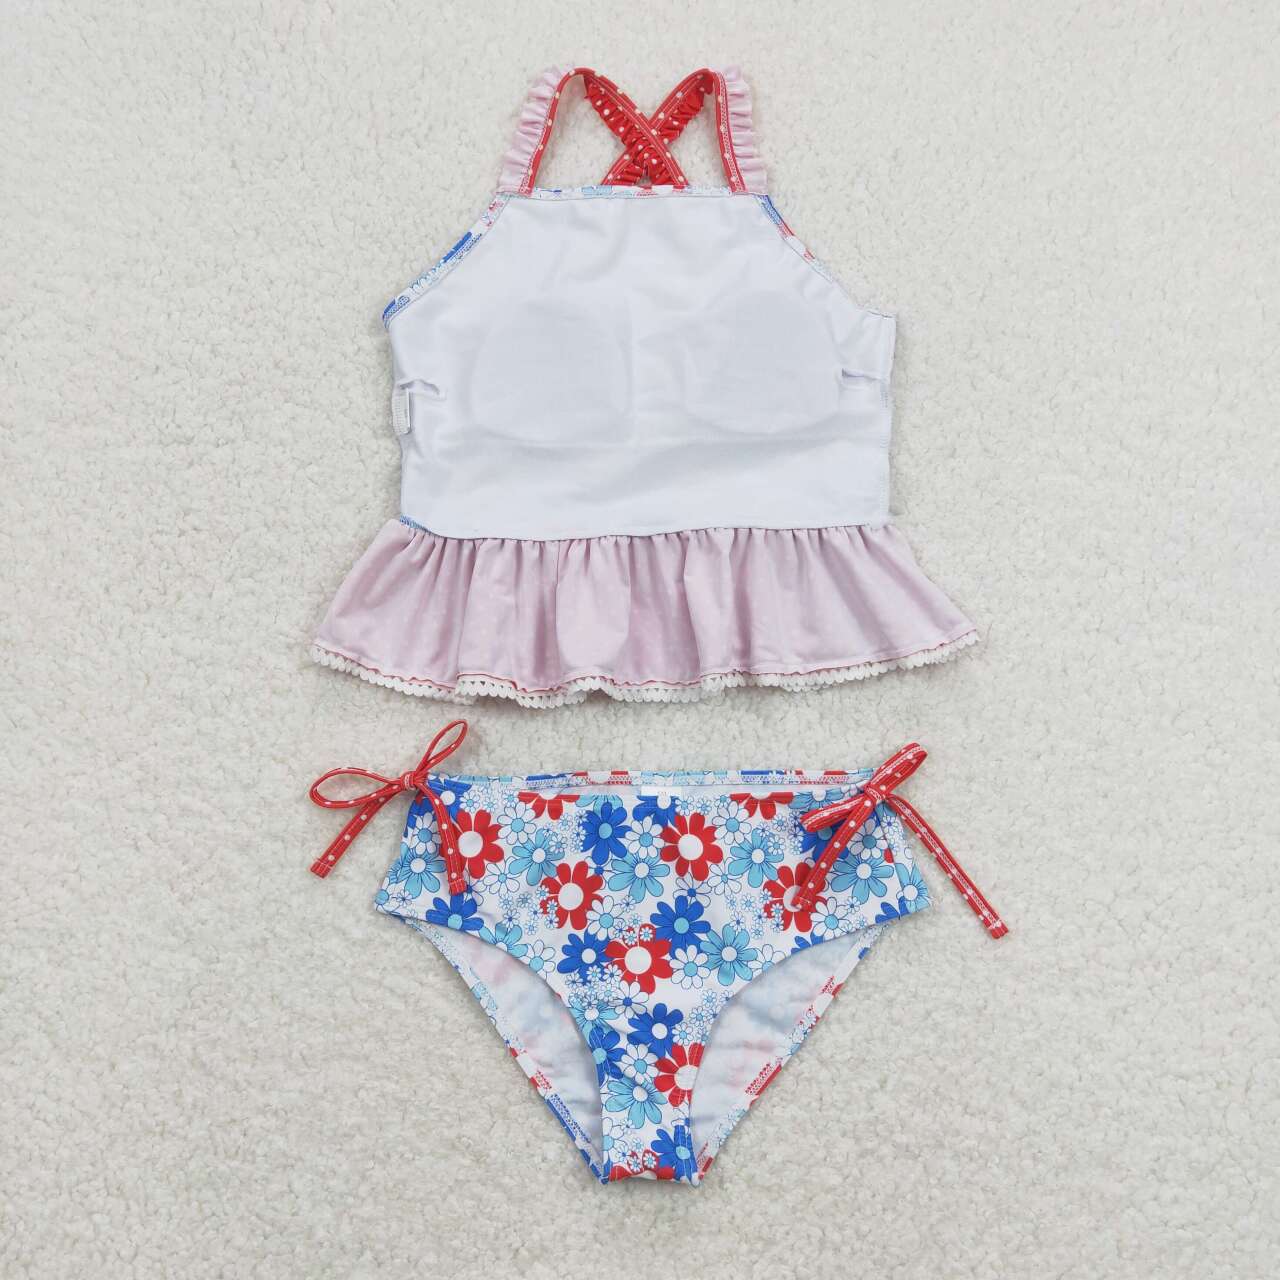 red  blue white flower july 4th bathing suit